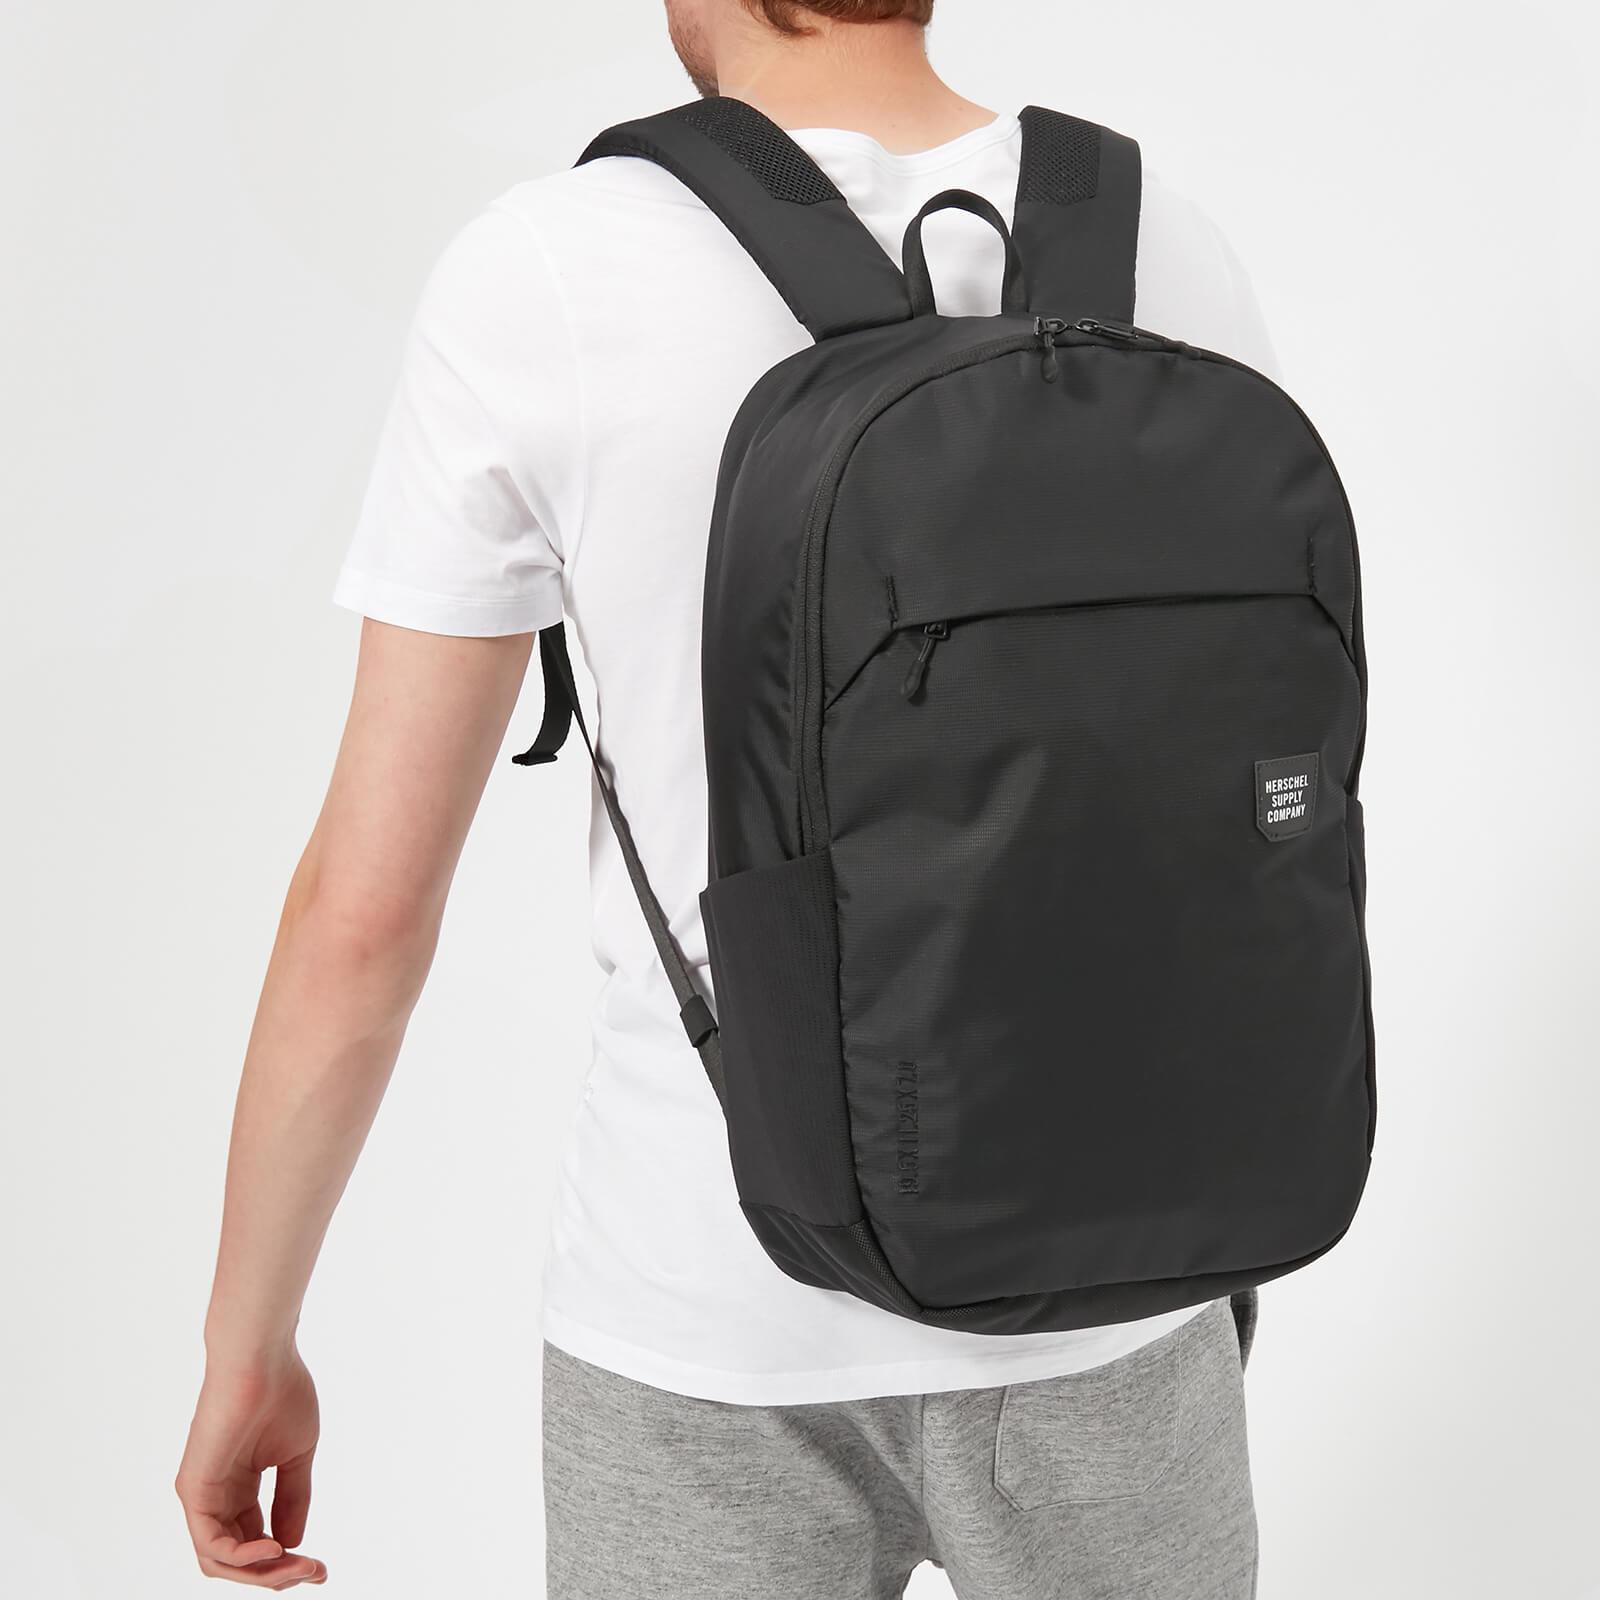 Herschel Supply Co. Synthetic Trail Mammoth Large Backpack in Black for Men  - Lyst